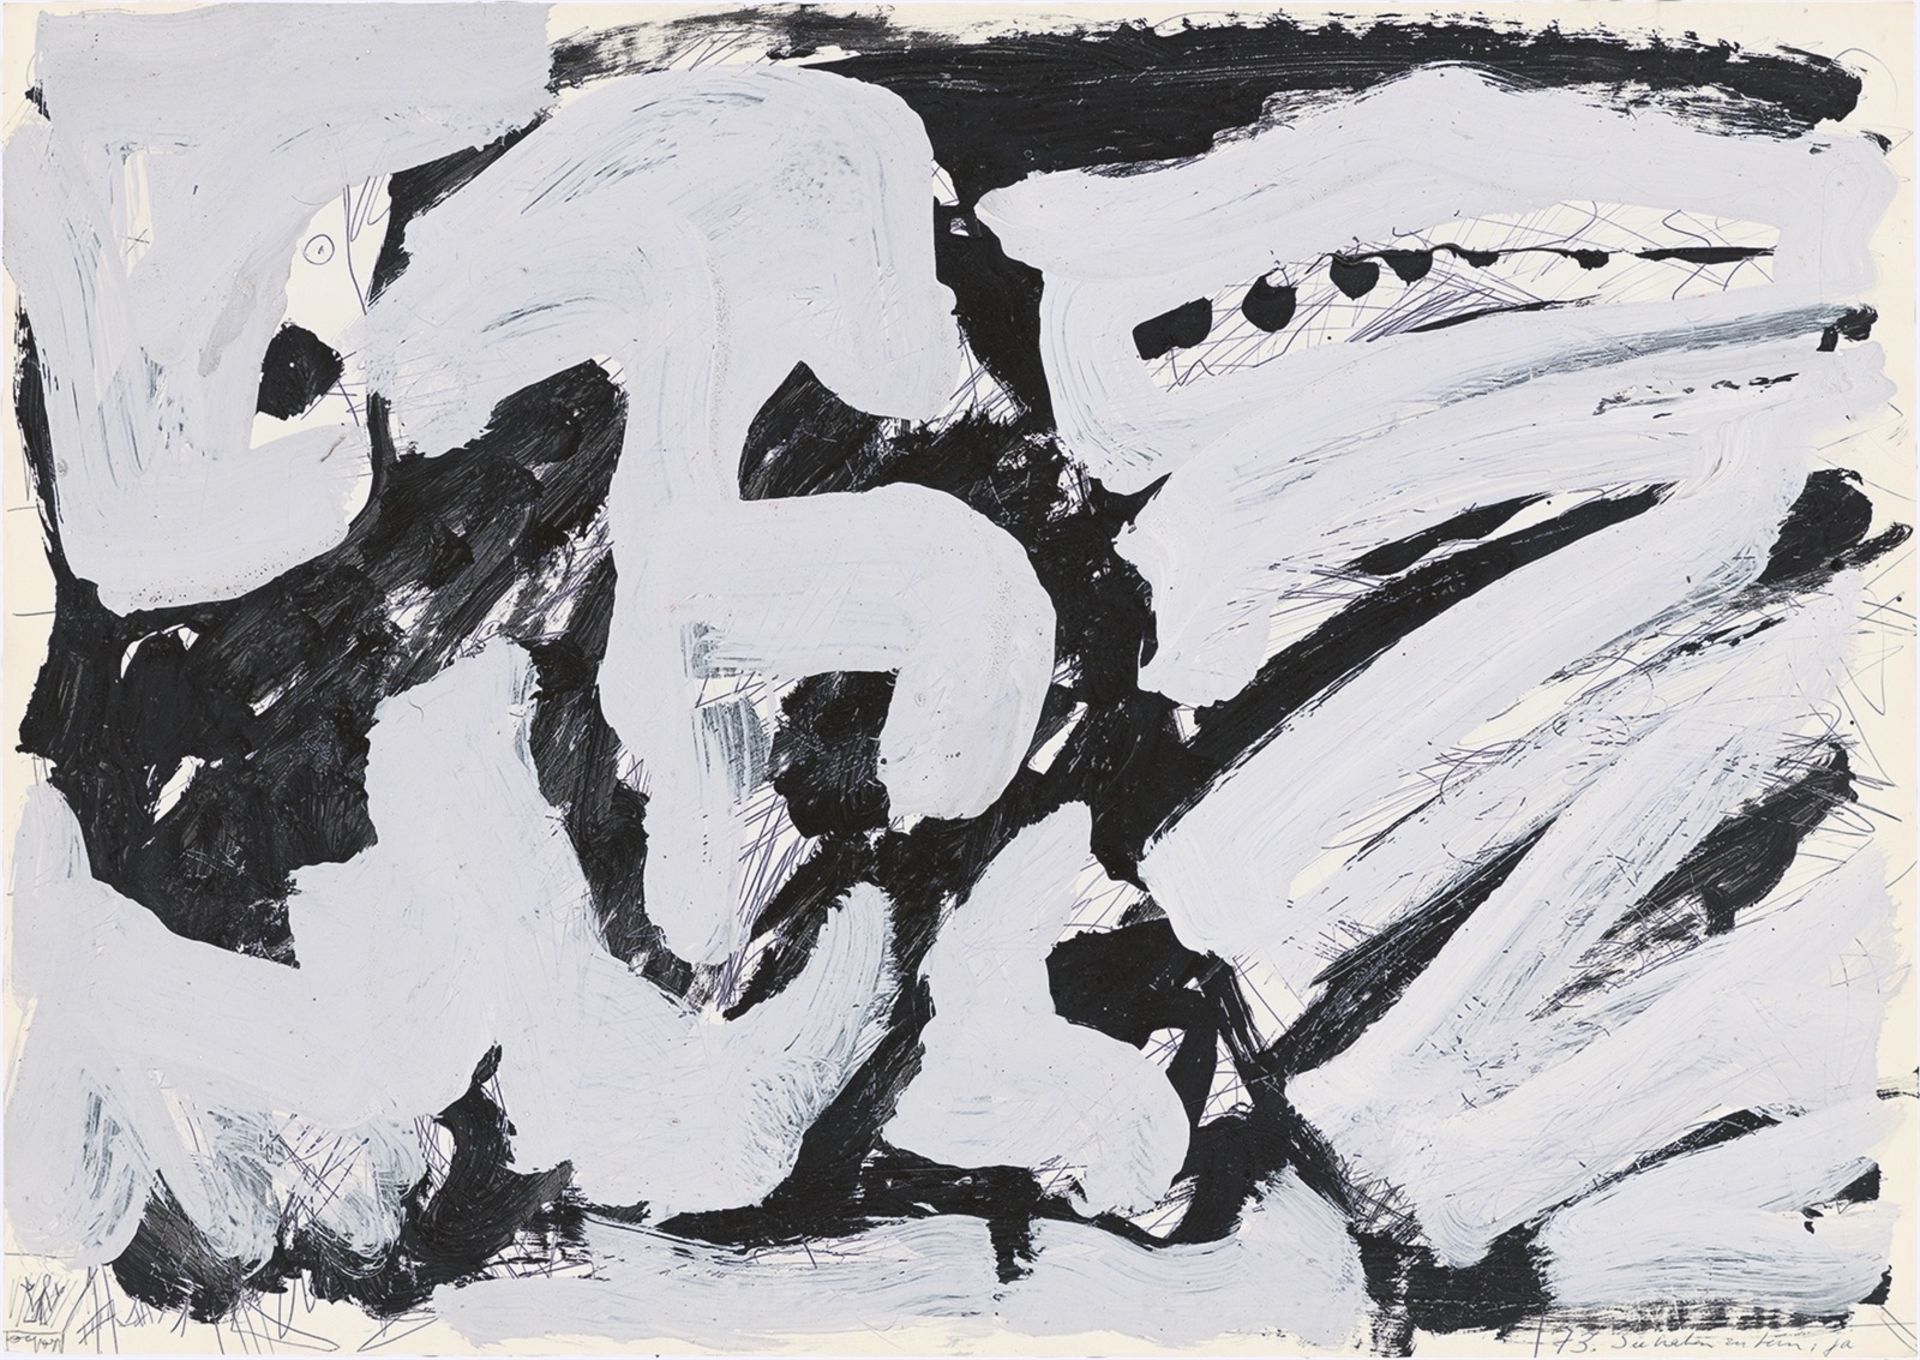 A.R. Penck. Untitled. 1975/76 - Image 5 of 10